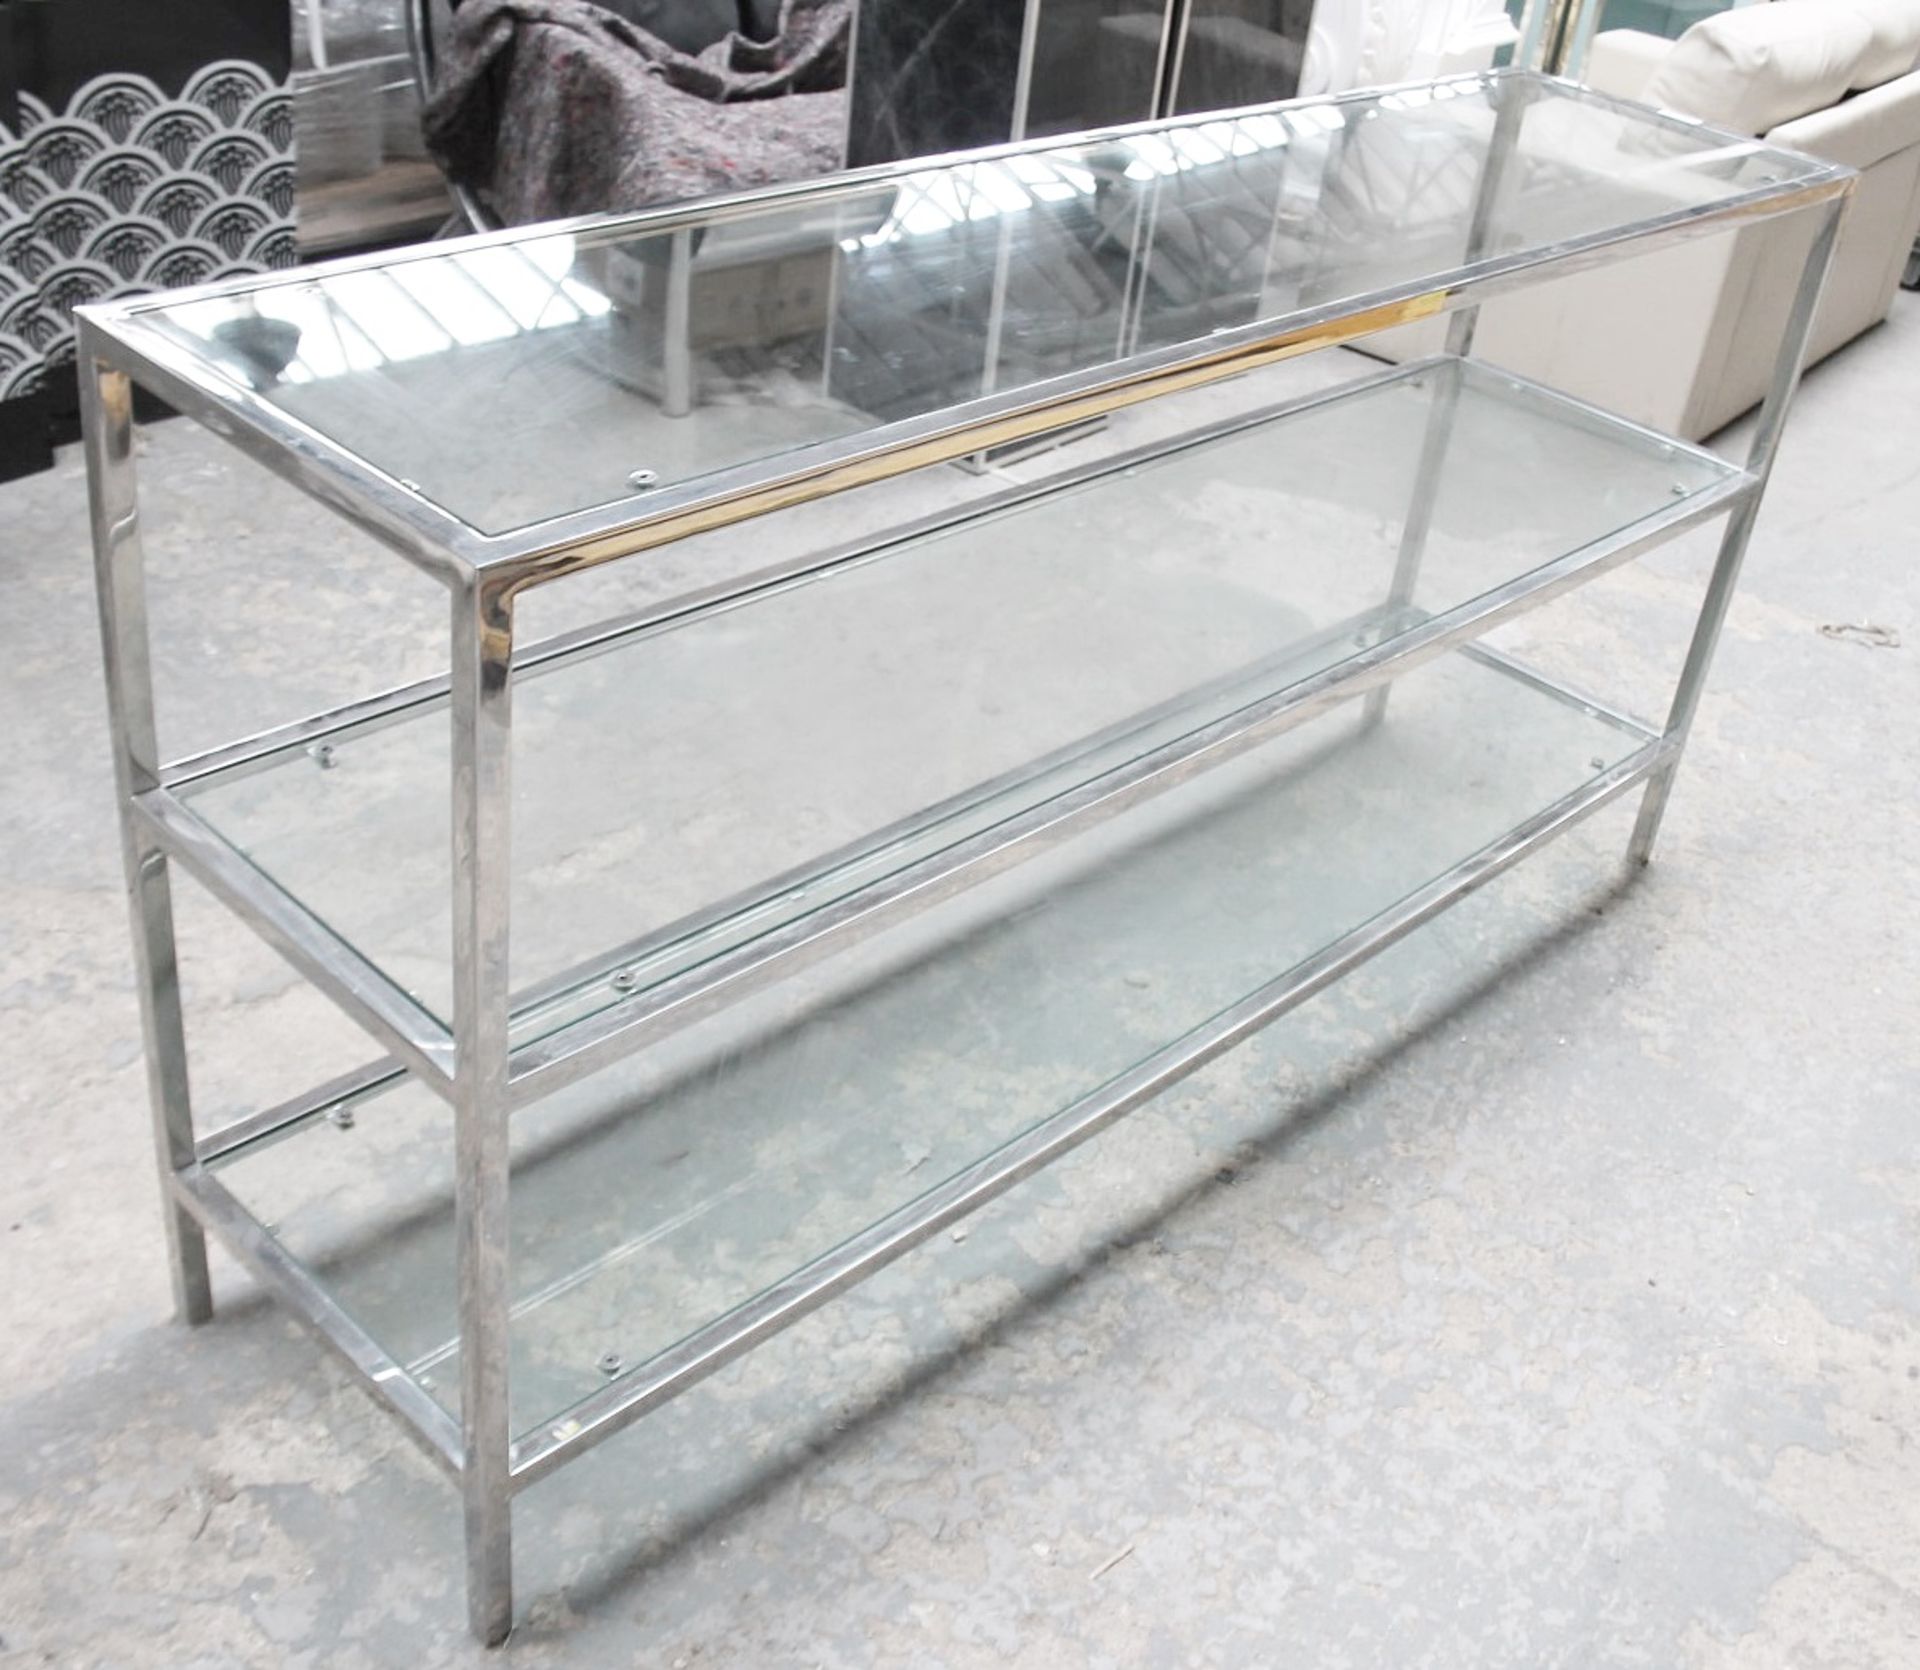 1 x 3-Tier Rectangular Metal Shop Display Unit With Glass Shelves In Chrome - Ex-Display Showroom